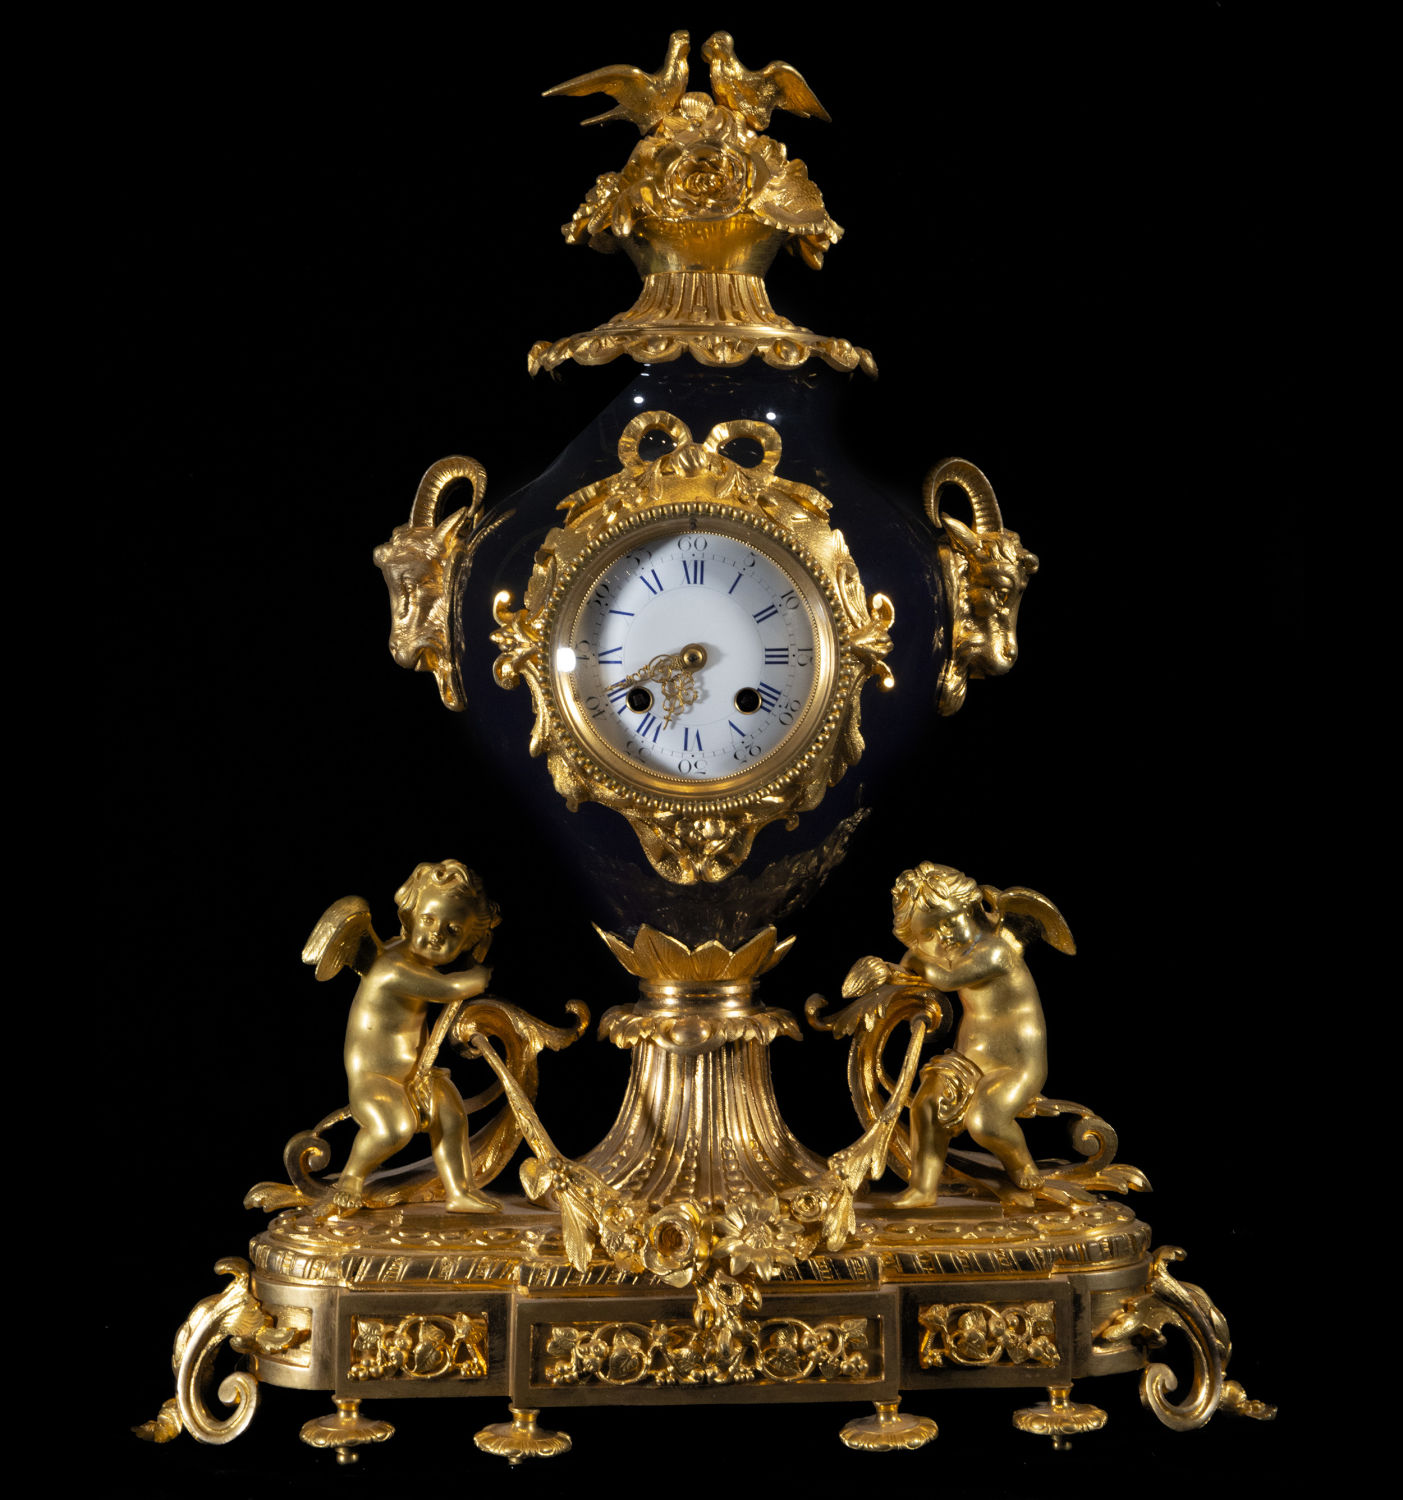 Elegant and Large Table Clock with French Sèvres Porcelain Garnish "Bleu Royale" Napoleon III of the - Image 3 of 12